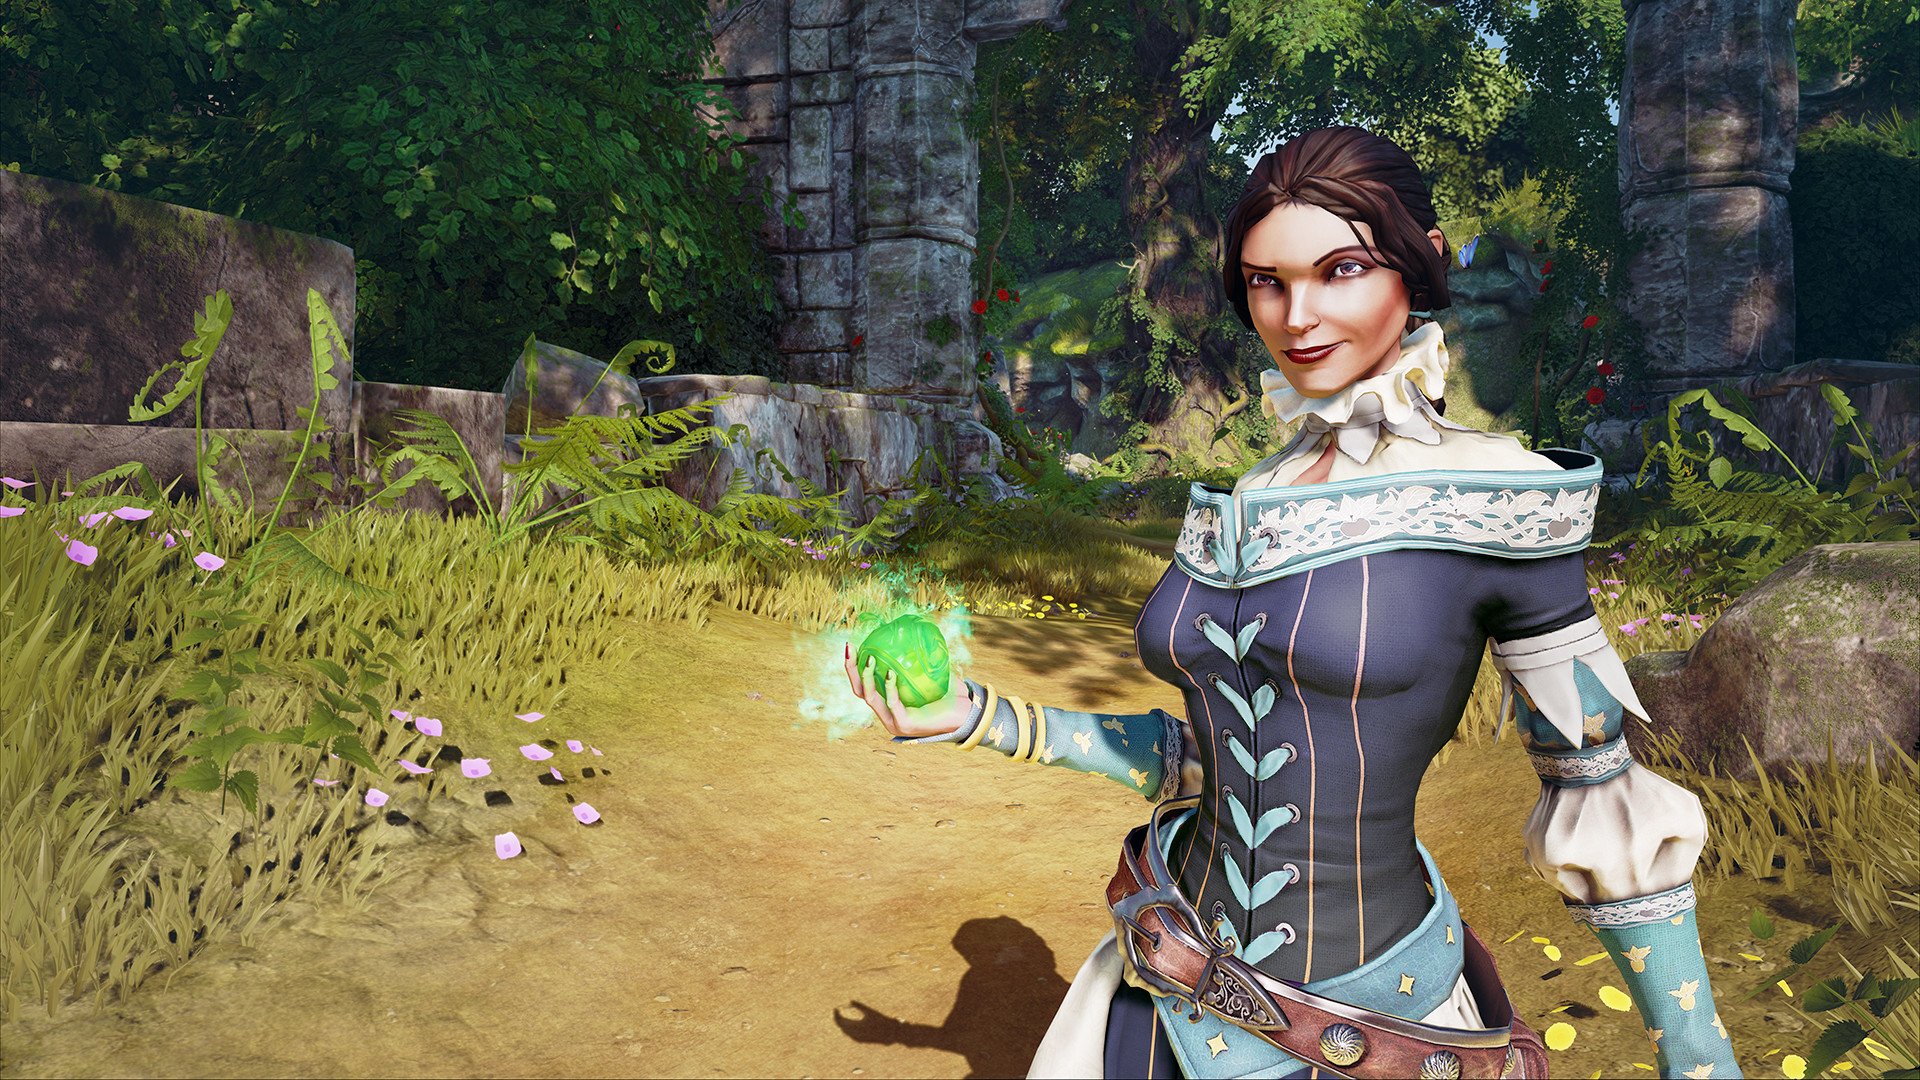 fable 4 release date pc